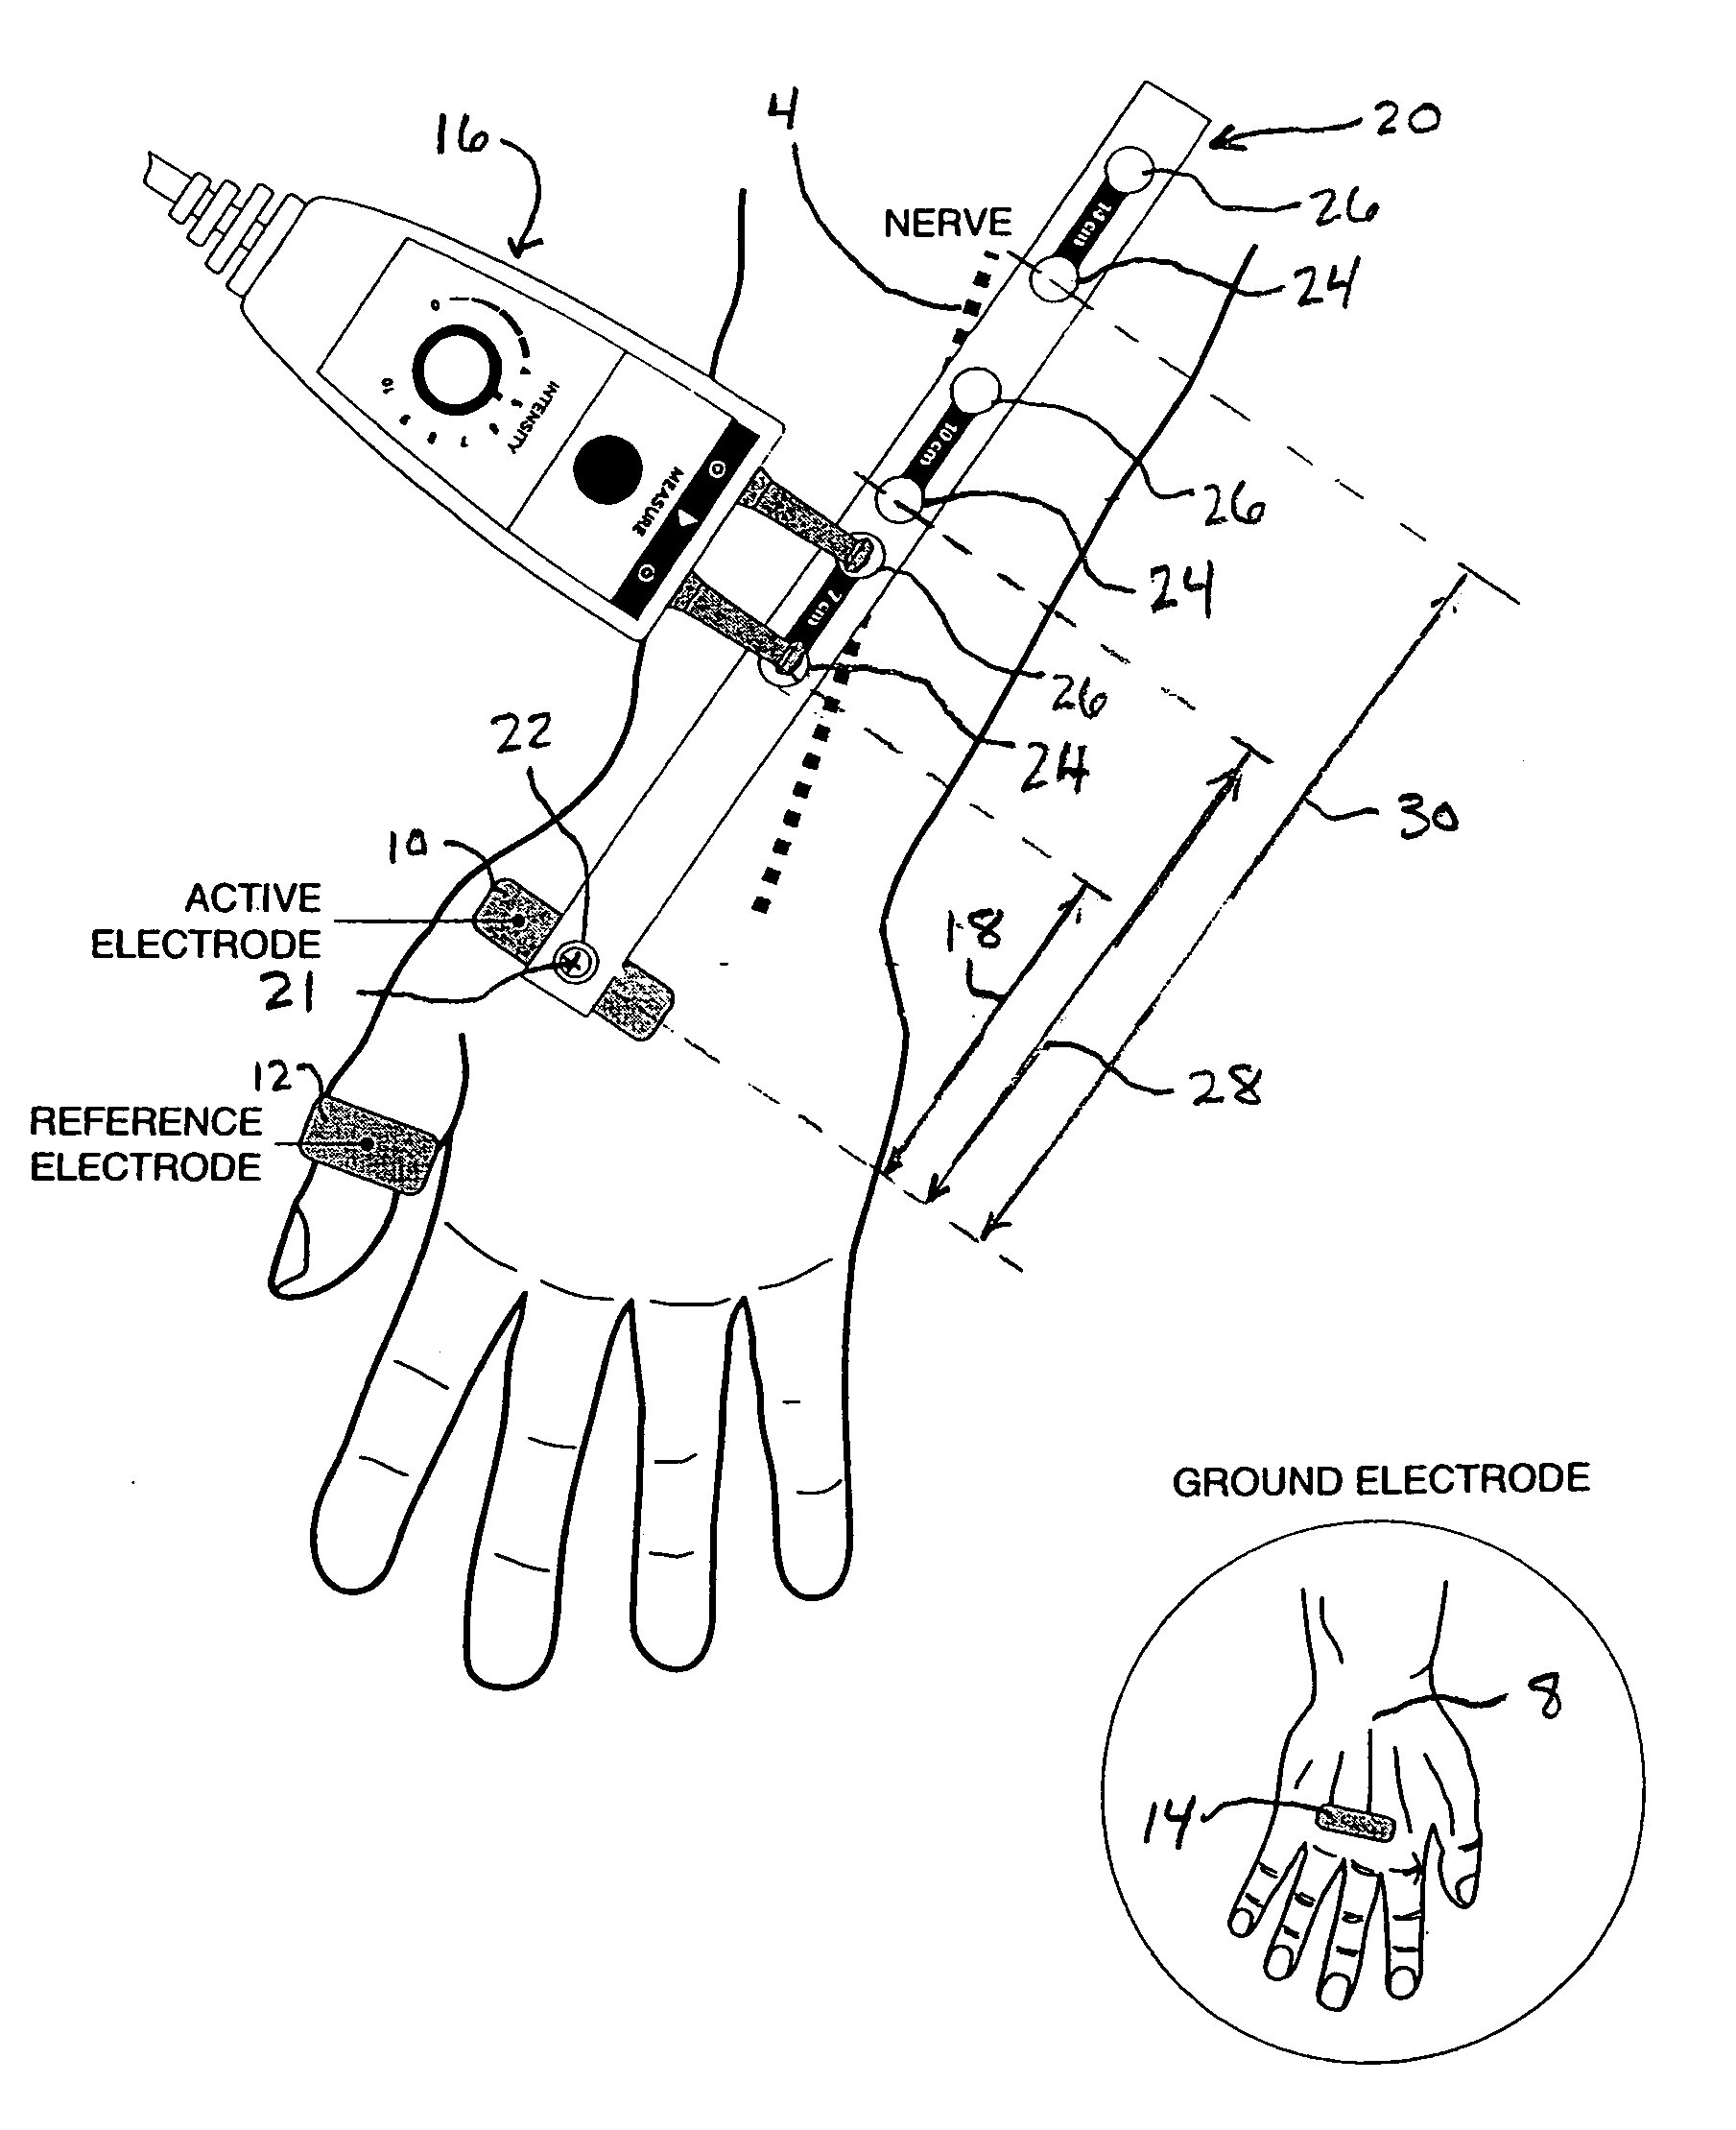 Apparatus for neuromuscular function signal acquisition